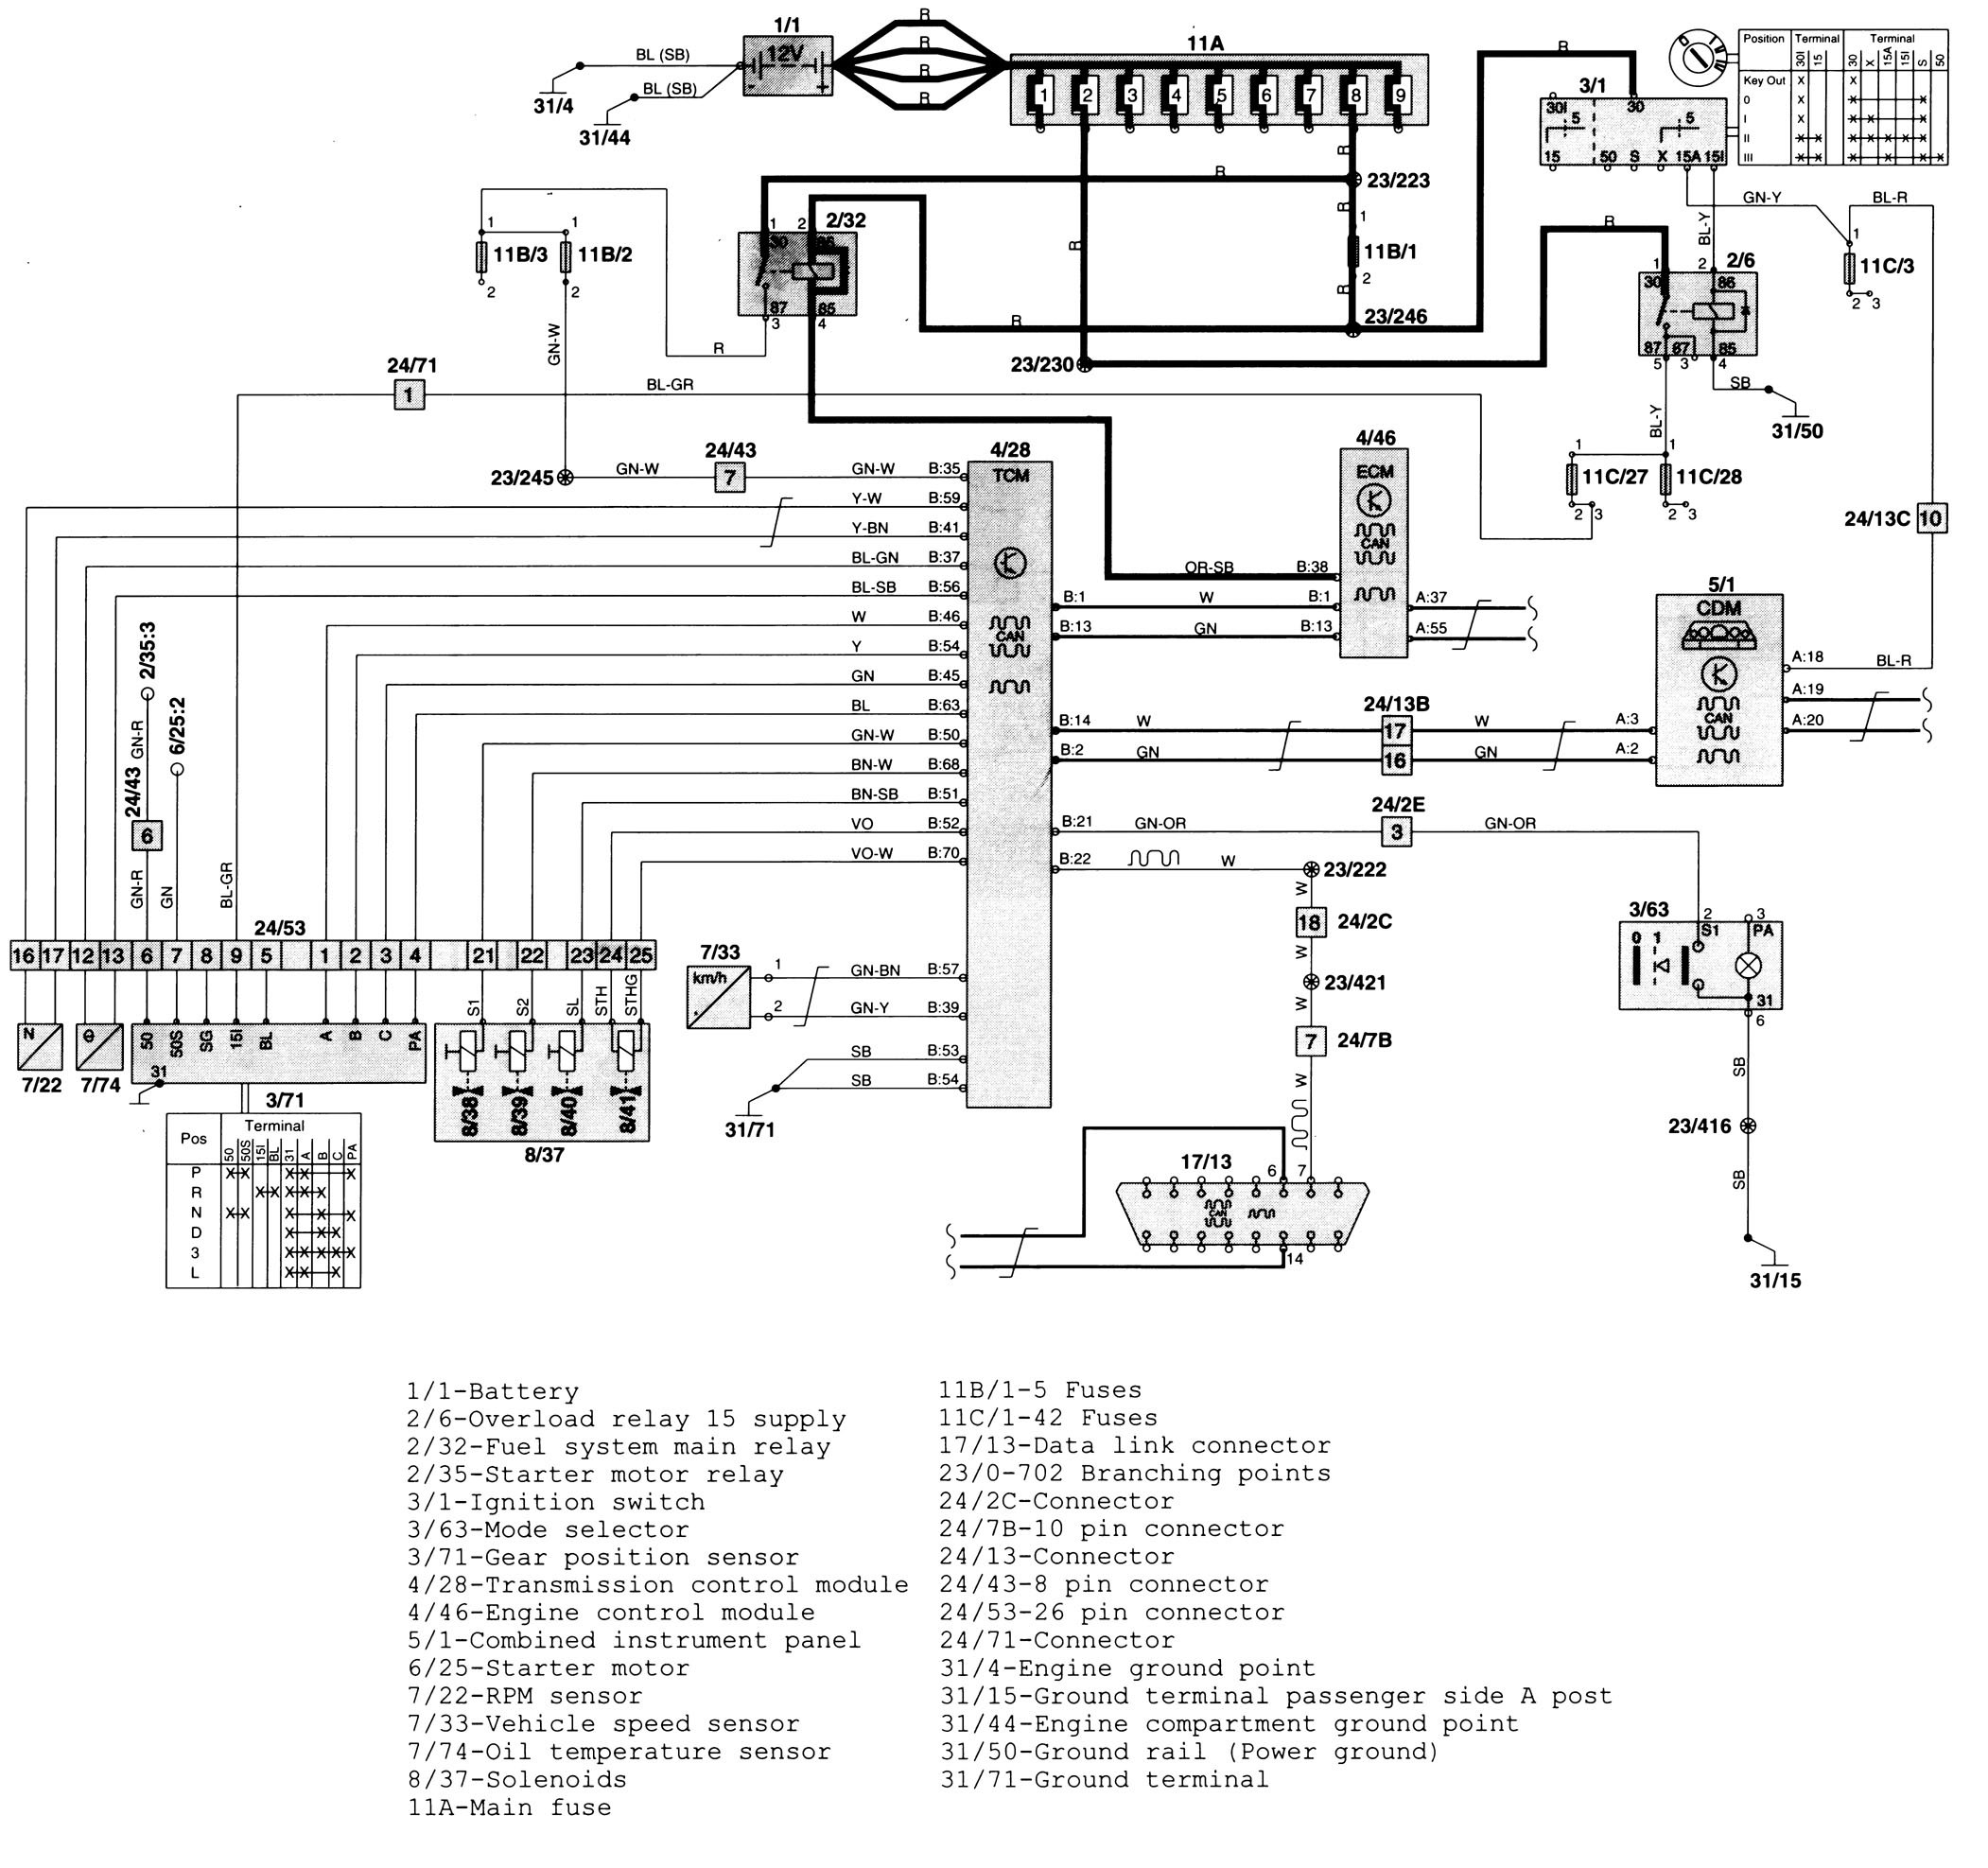 Volvo V70 Wiring Diagram from www.carknowledge.info